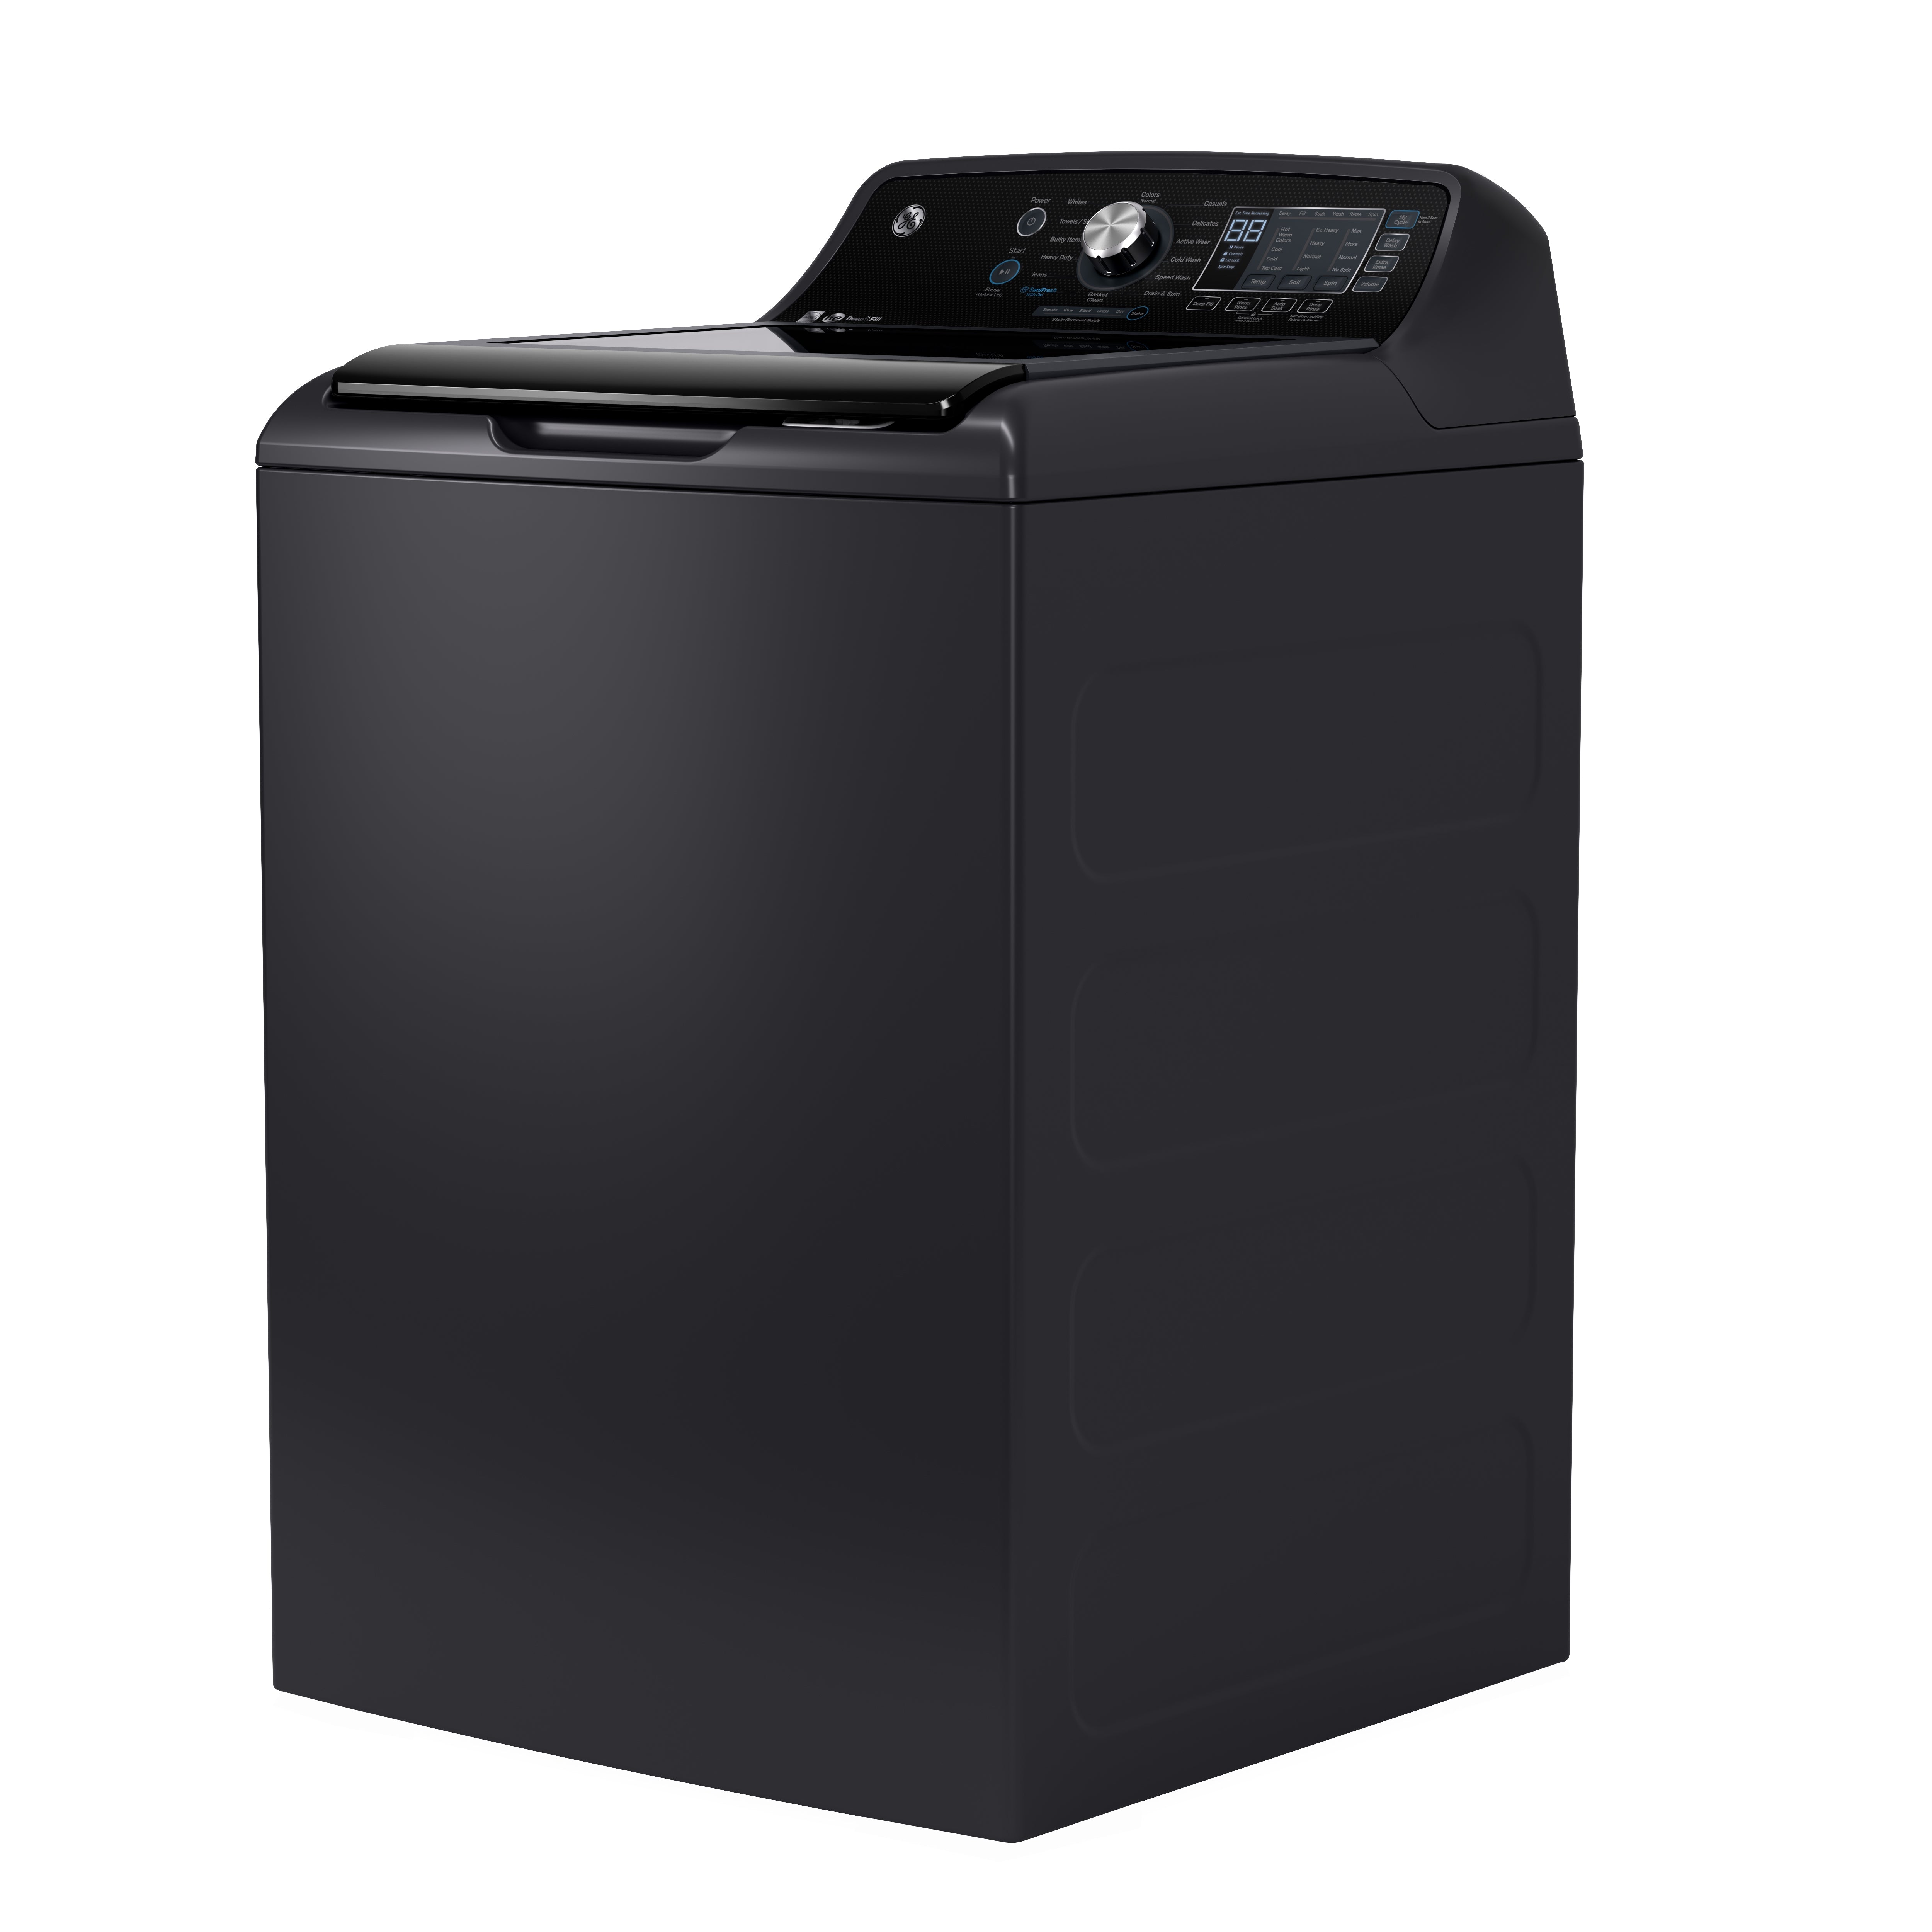 GE - 5.3 cu. Ft  Top Load Washer in Grey - GTW690BMTDG